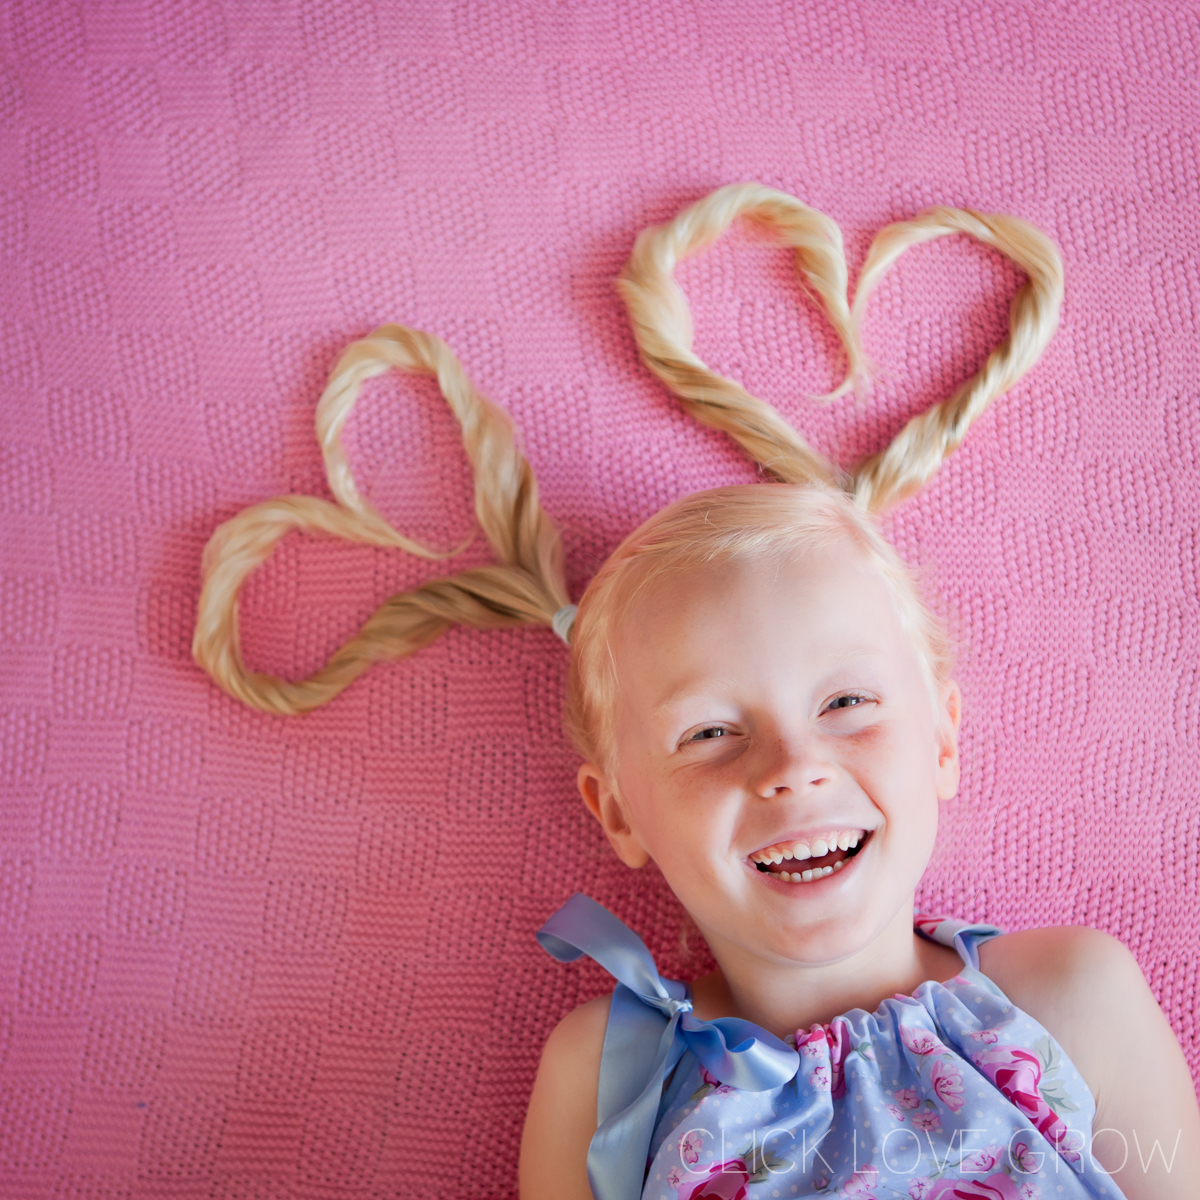 little girl with hair arranged like hearts smiling for the shot